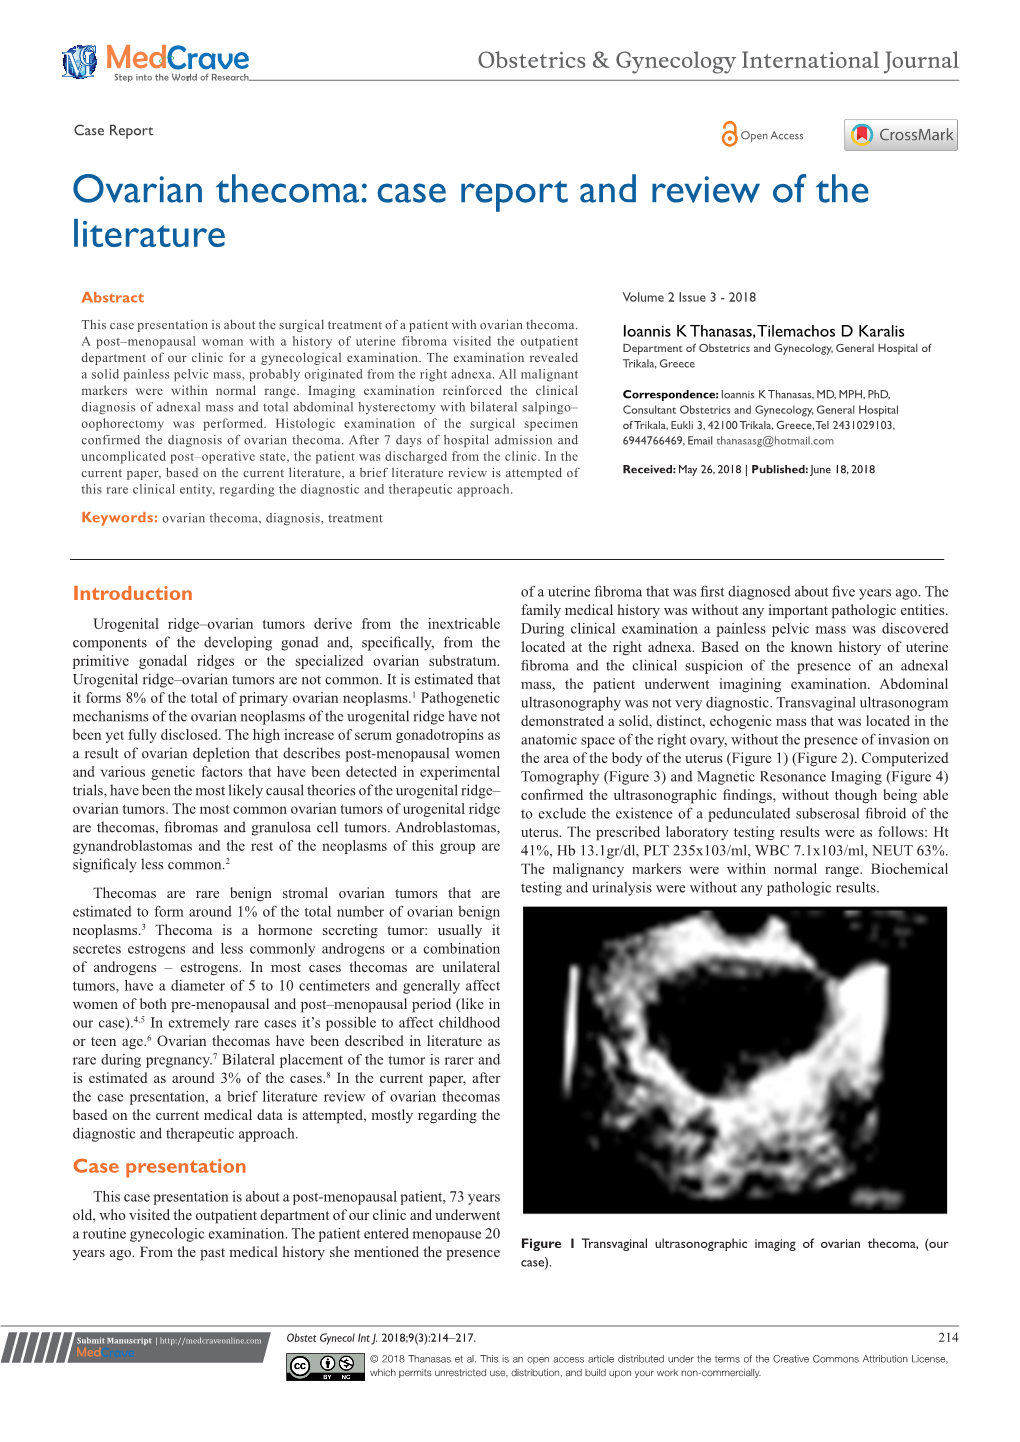 Ovarian Thecoma: Case Report and Review of the Literature